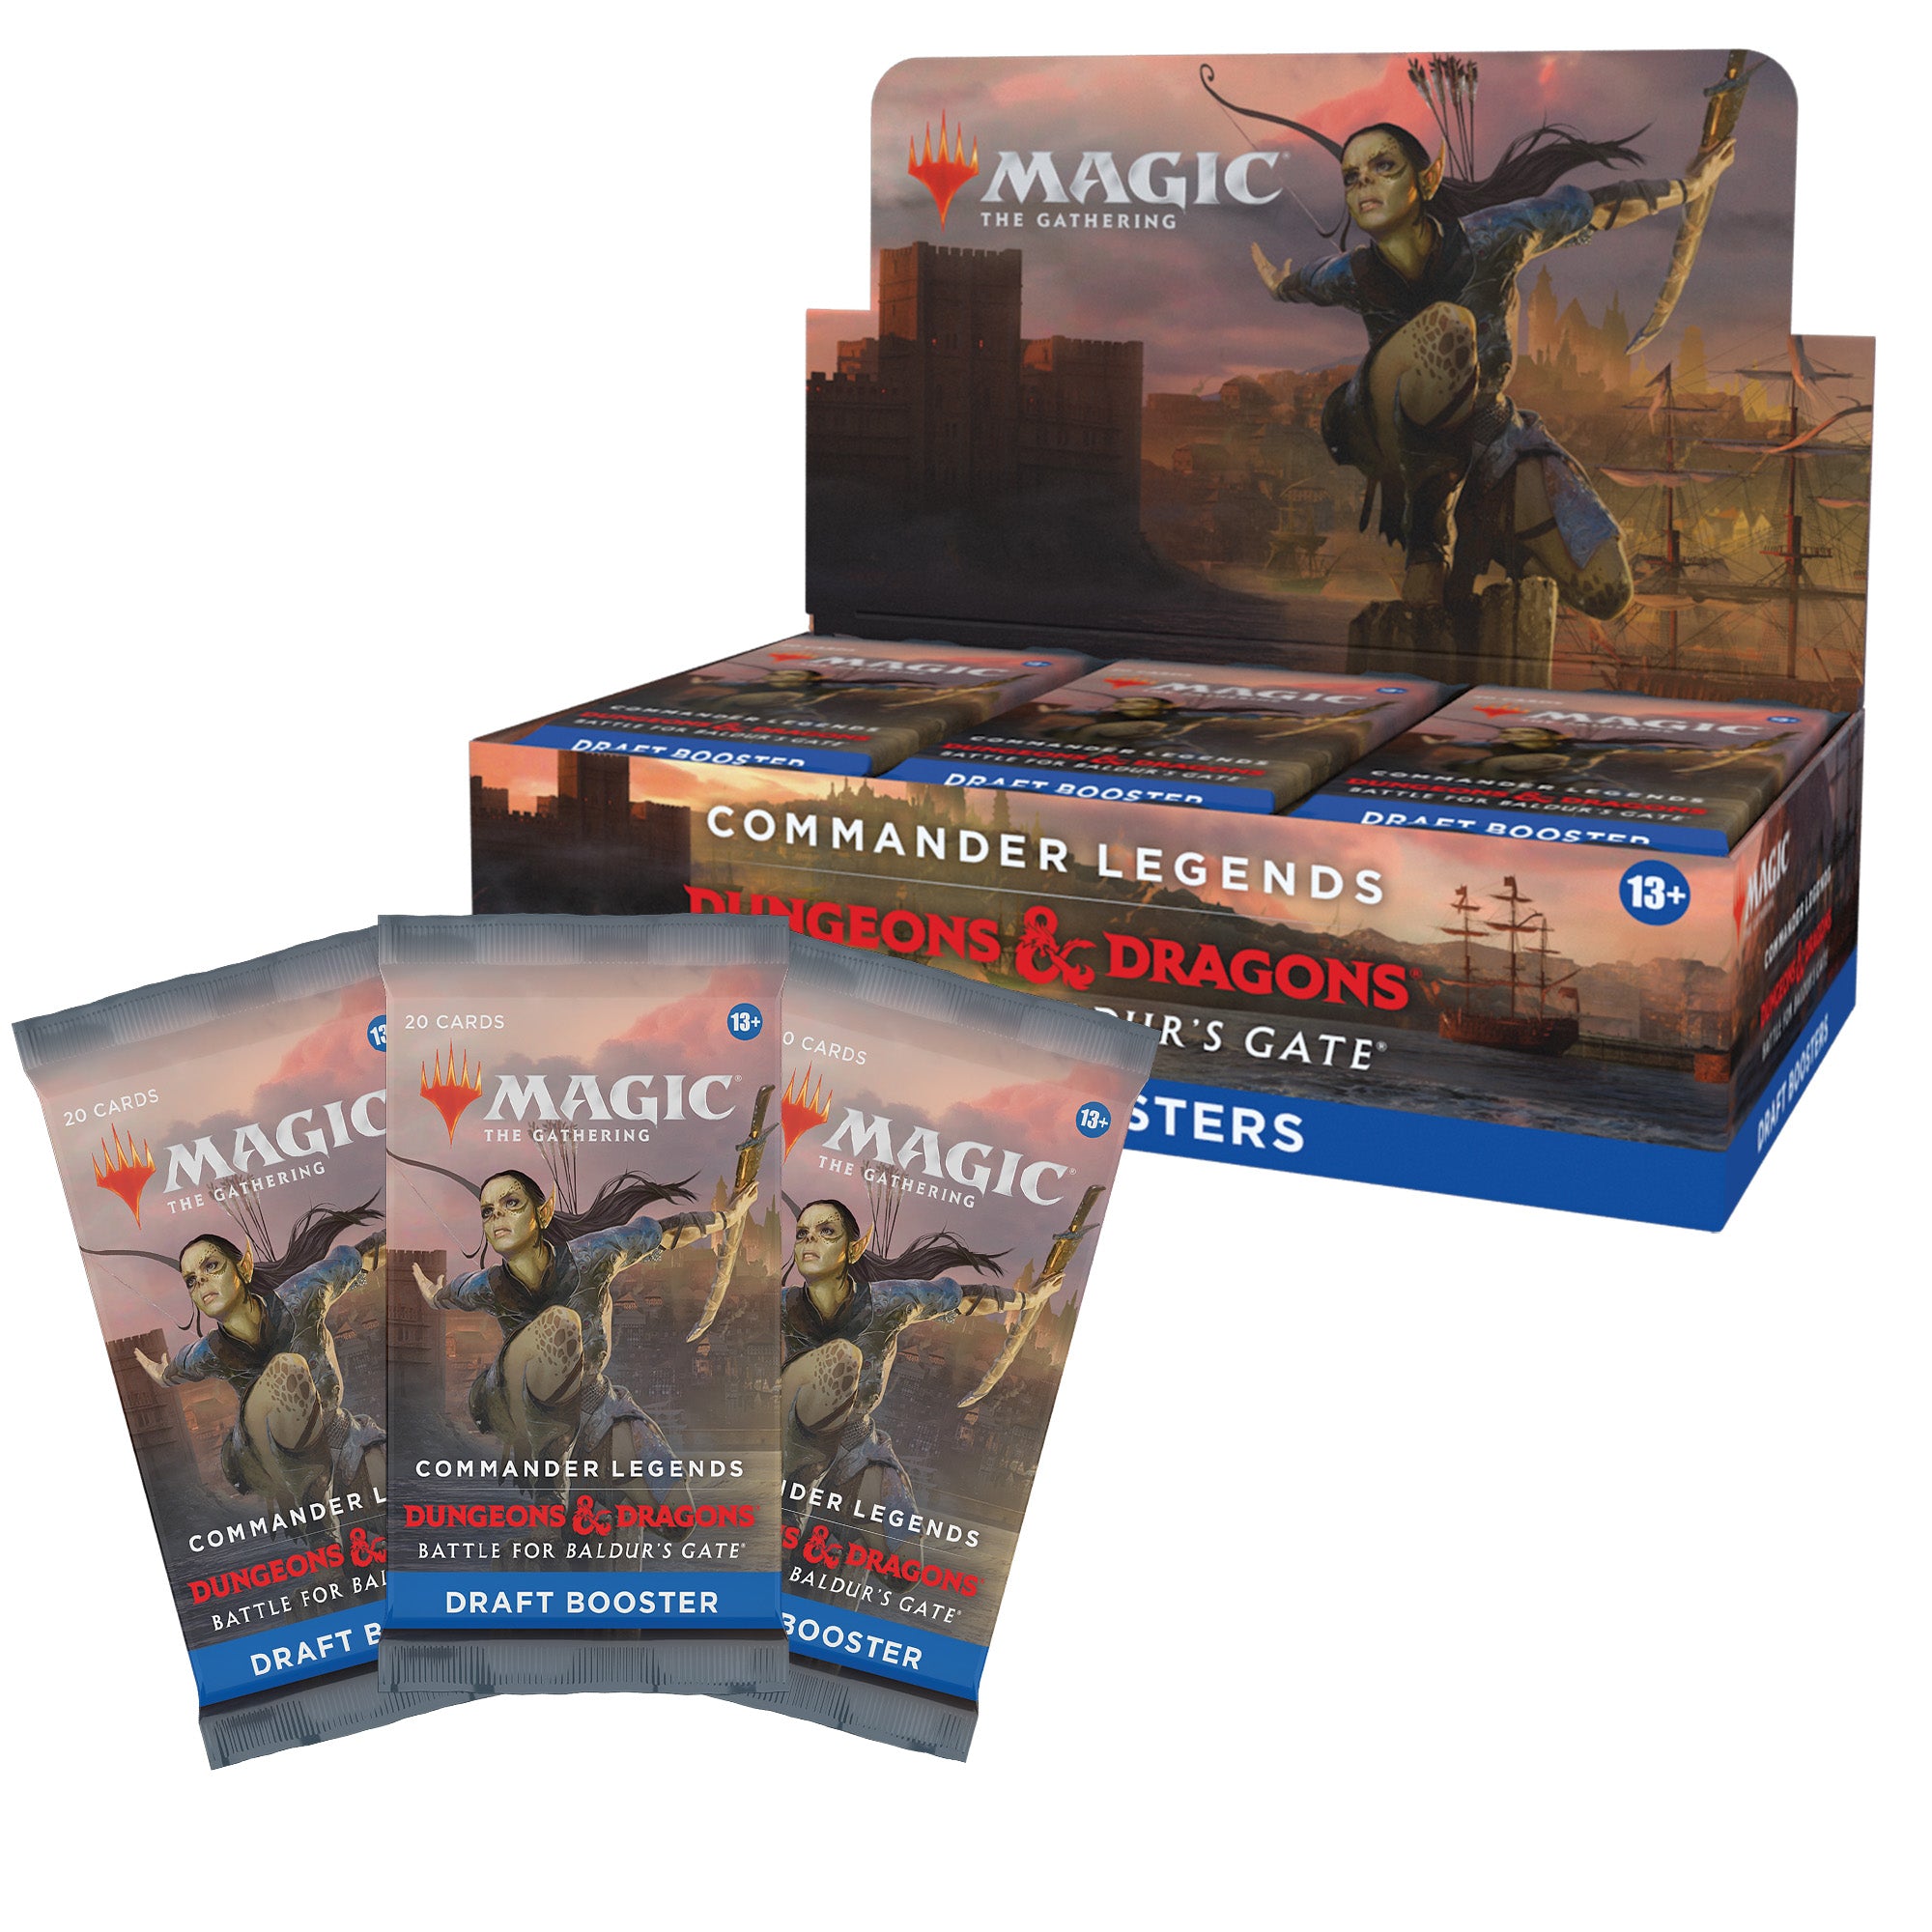 Magic the Gathering Commander Legends Battle for Baldur's Gate - Draft Booster Box with Buy-a-Box Promo